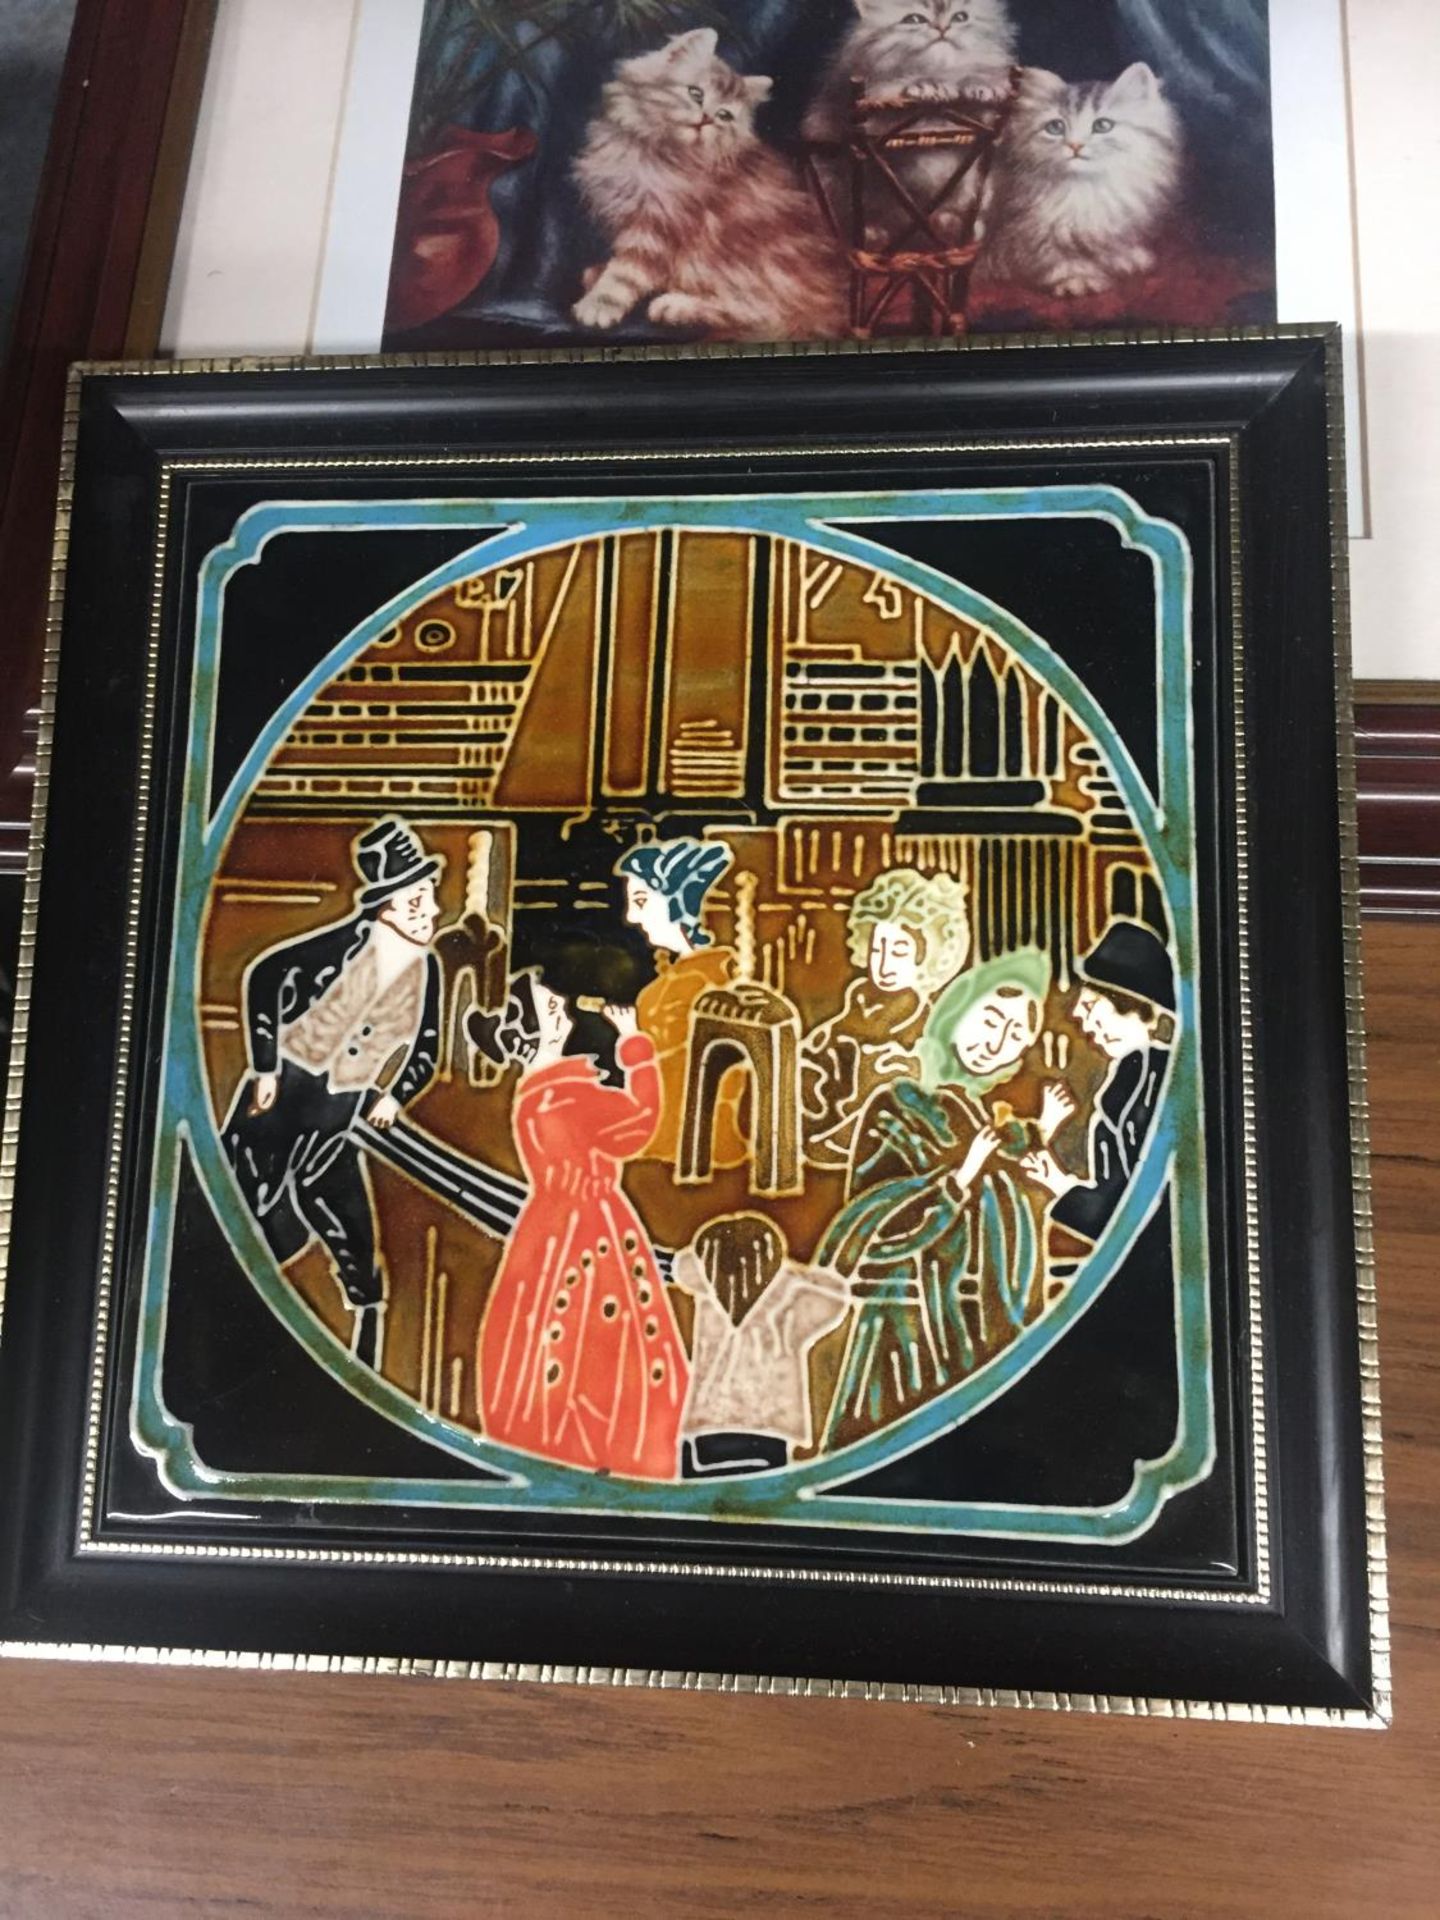 TWO FRAMED CERAMIC TILES FEATURING VINTAGE PUB SCENES PLUS A FRAMED PRINT OF THREE KITTENS - Image 2 of 3